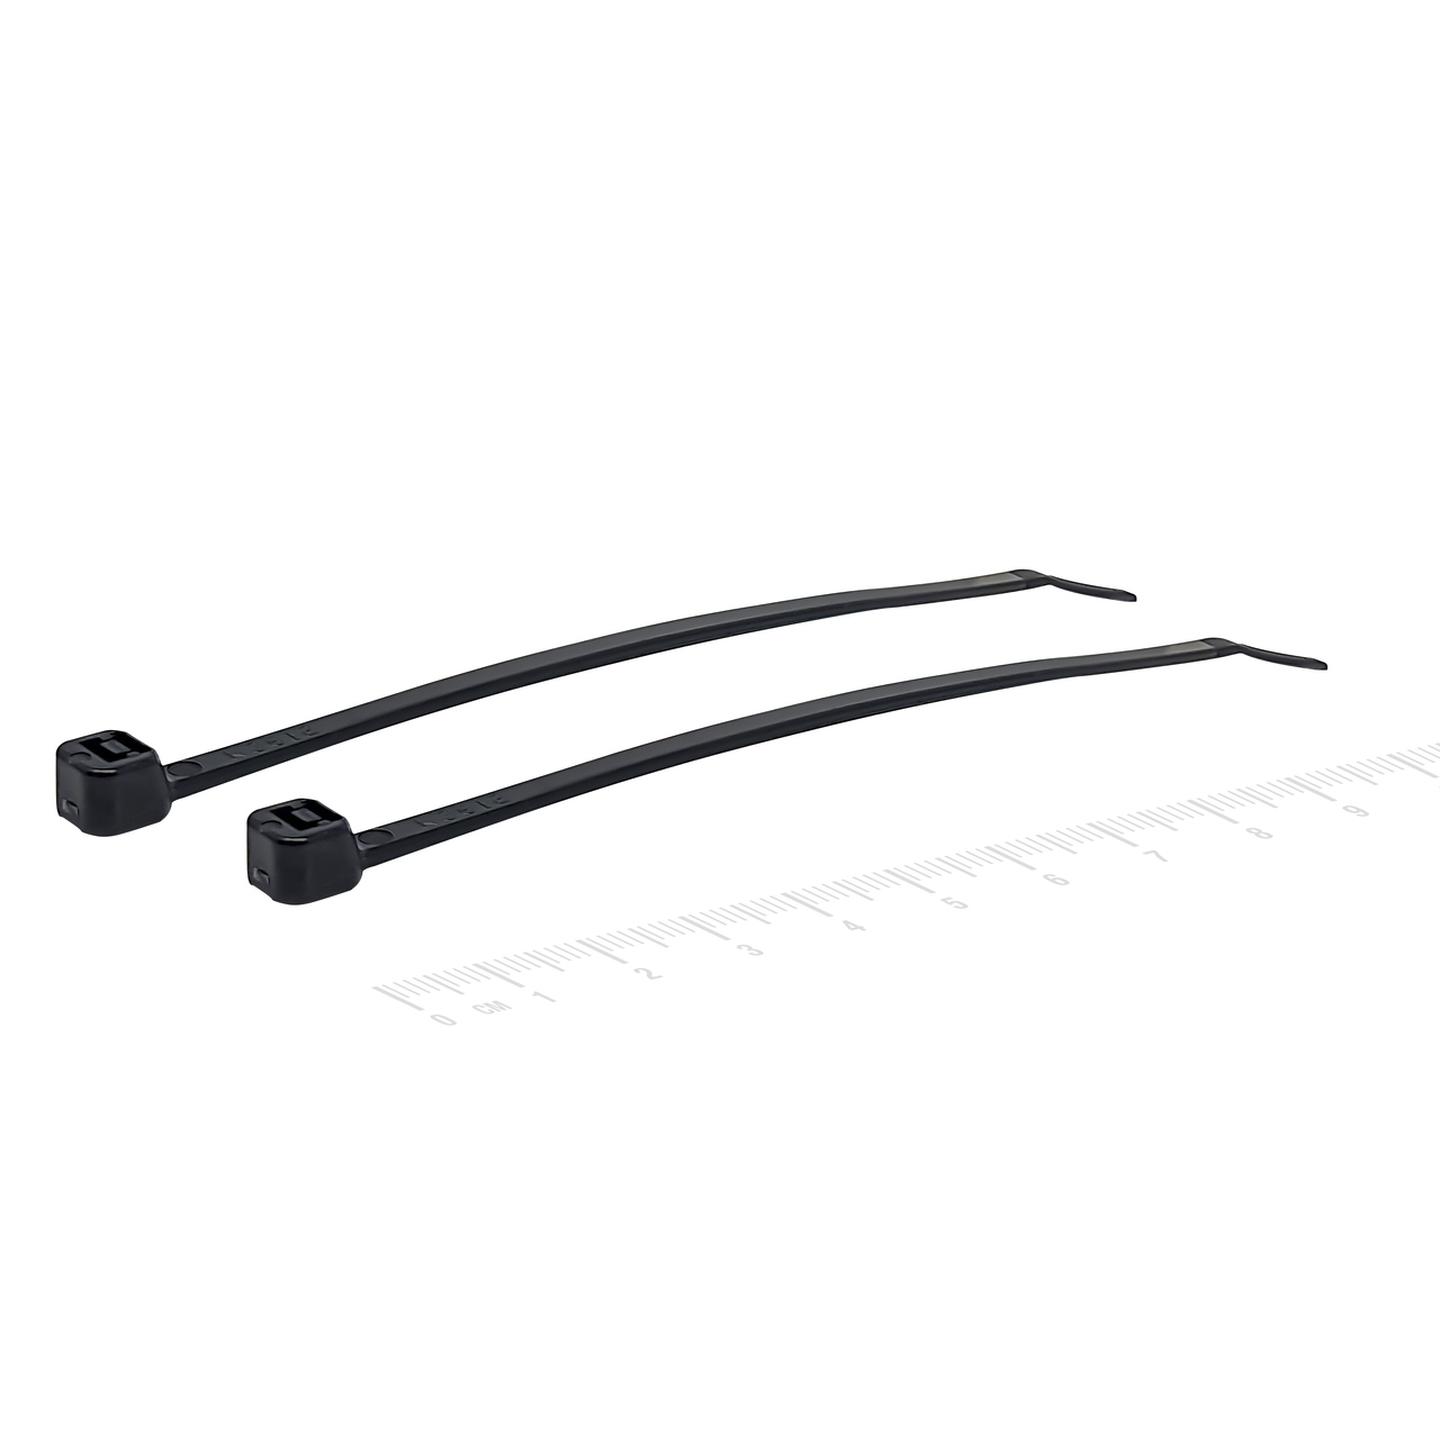 100mm Black Cable Ties - Pack of 20